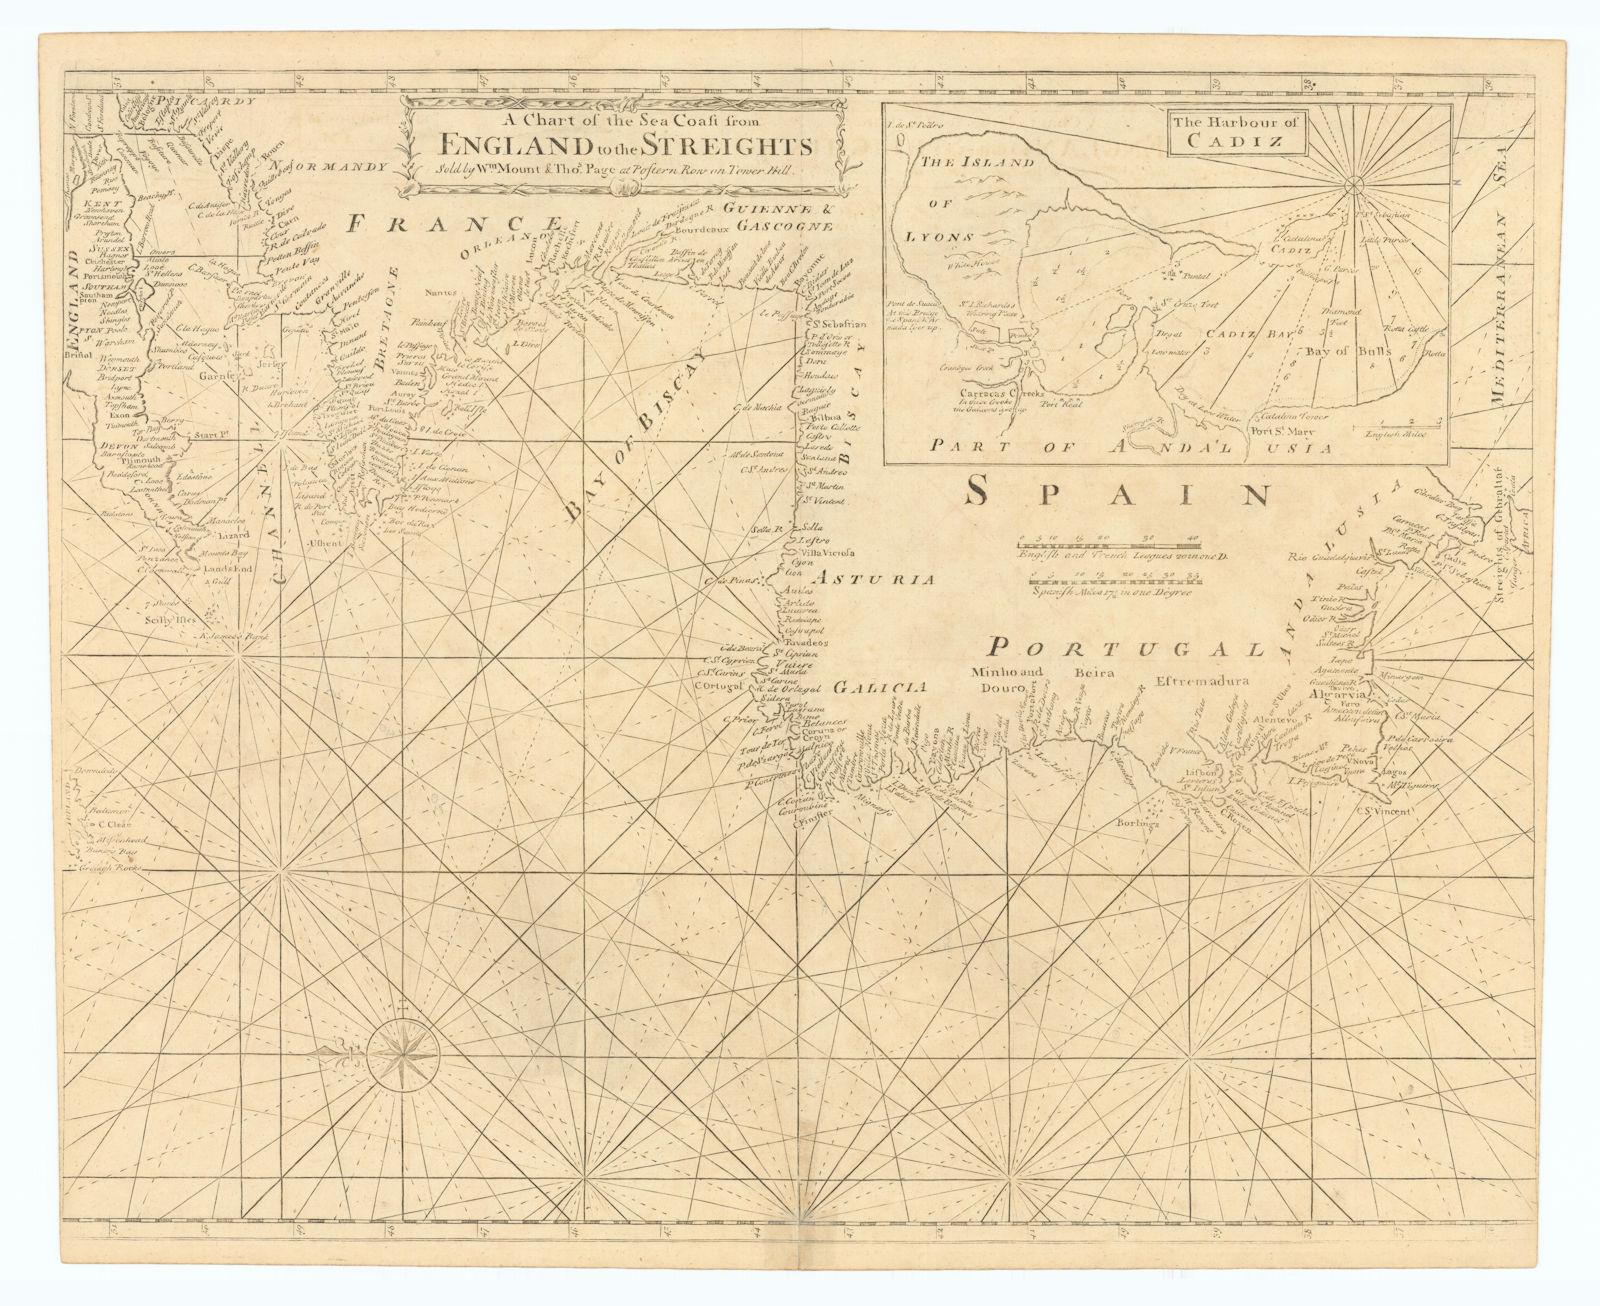 A Chart of the Sea Coast from England to the Streights. MOUNT & PAGE 1758 map